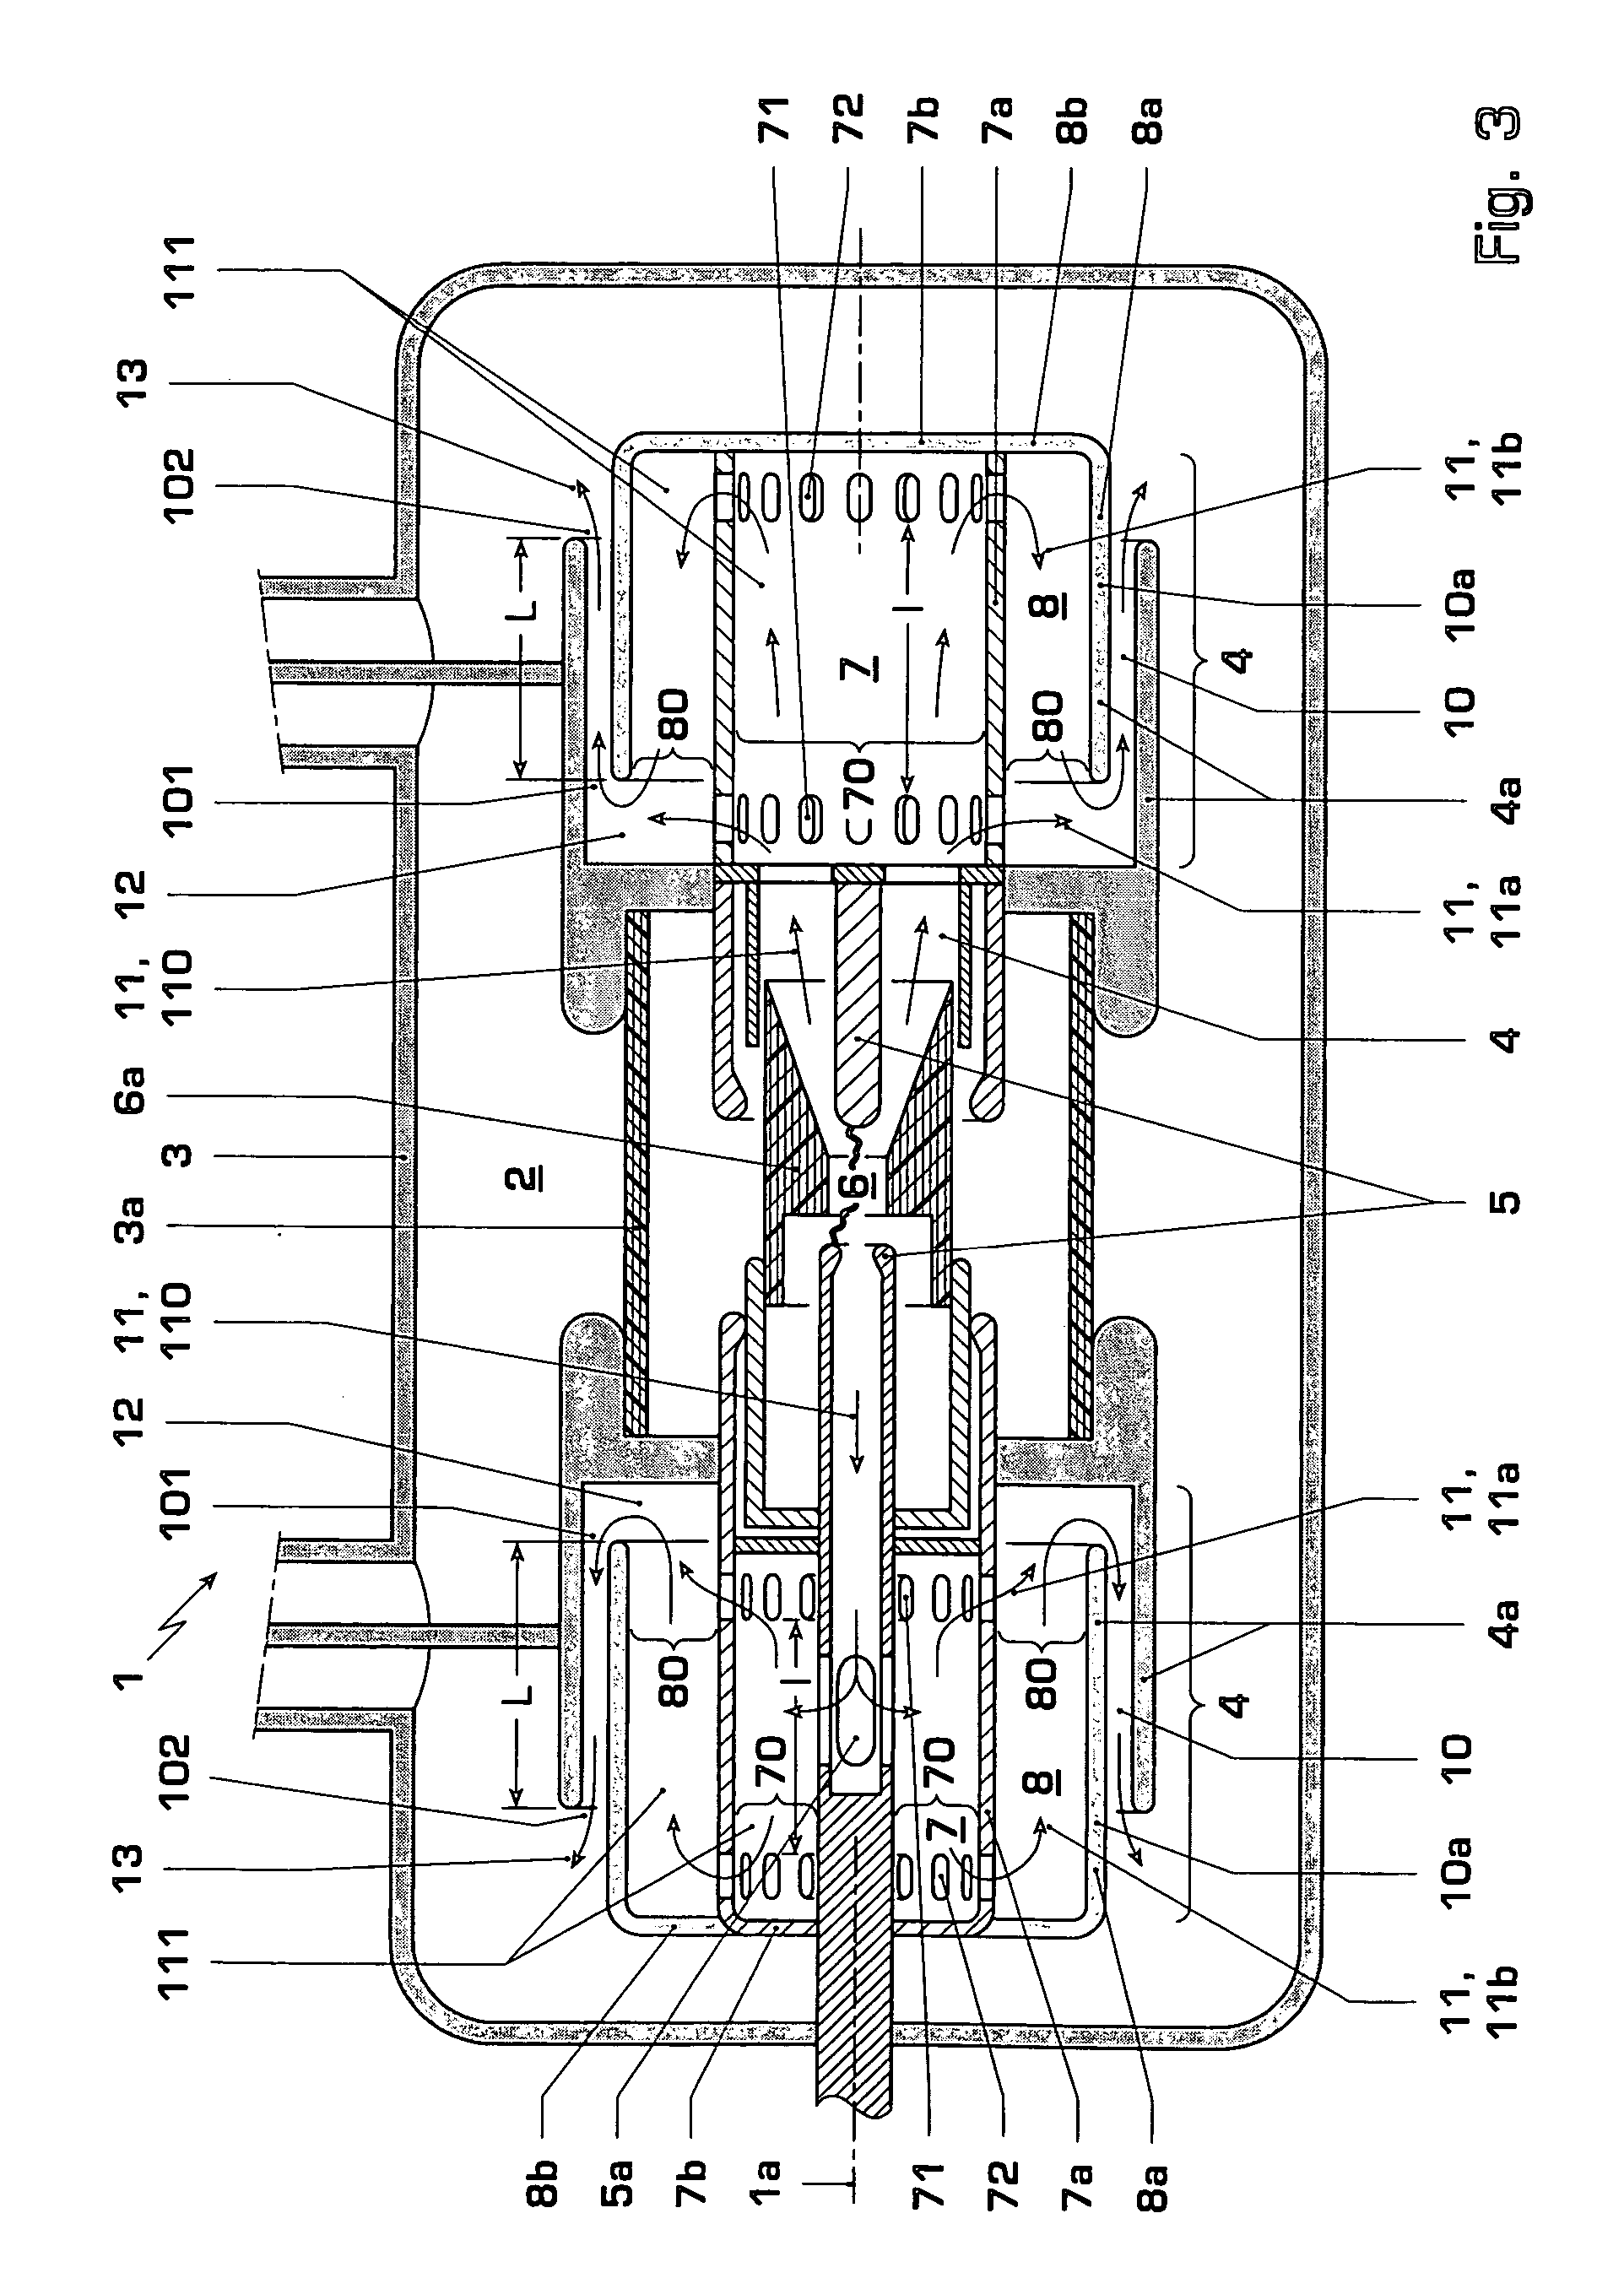 High-voltage circuit breaker with improved circuit breaker rating